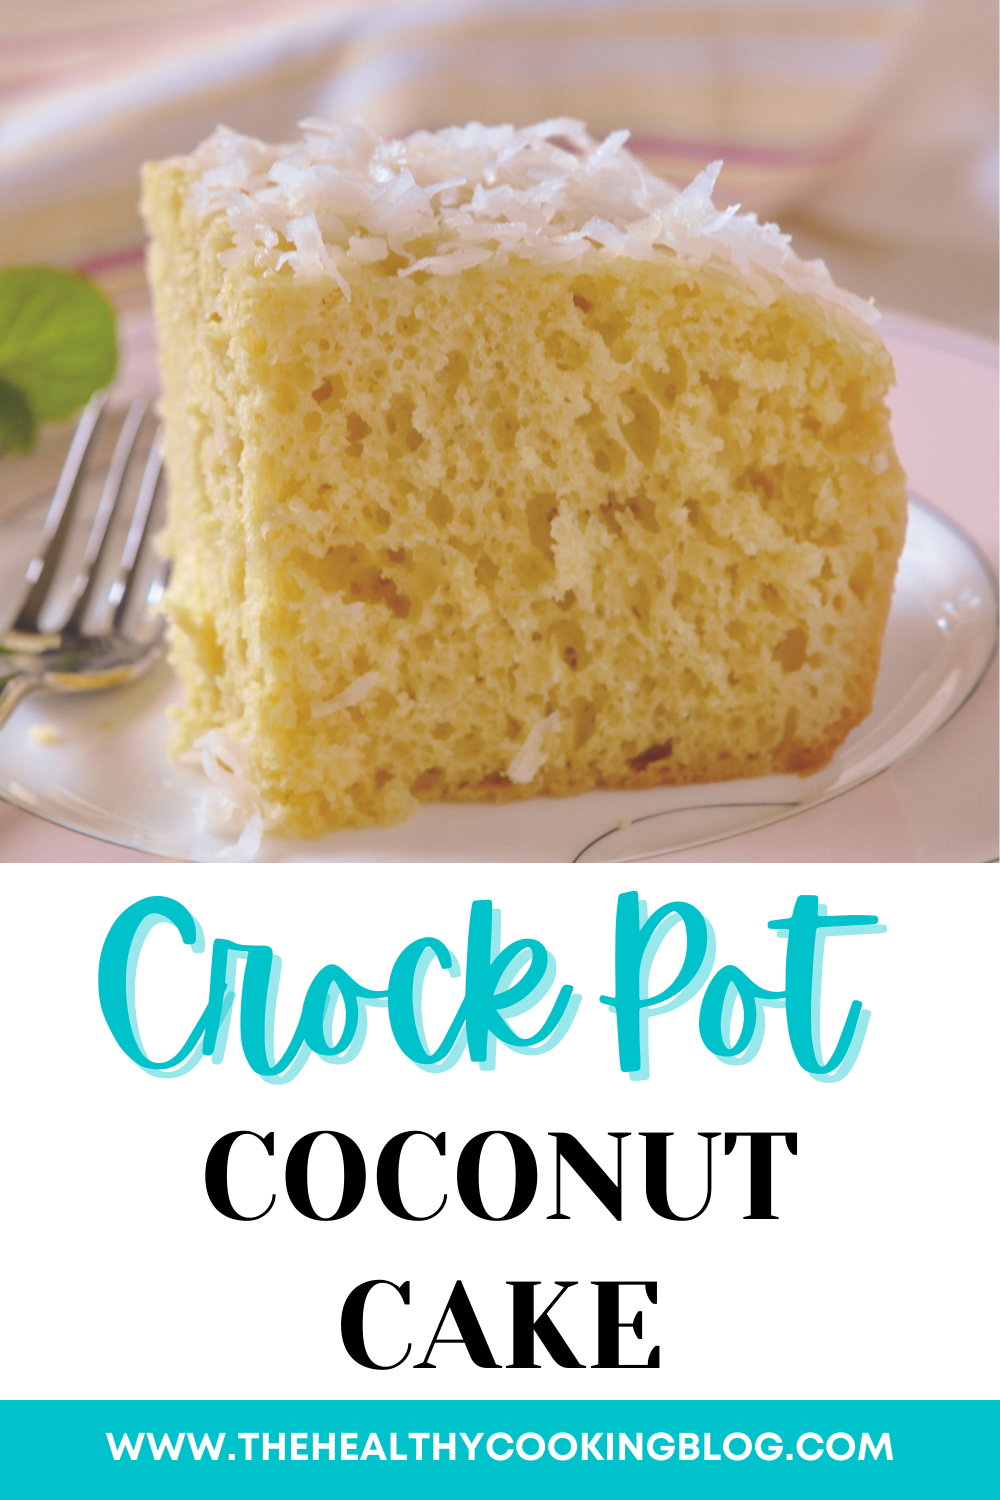 How to Make Coconut Cake in a Crock Pot